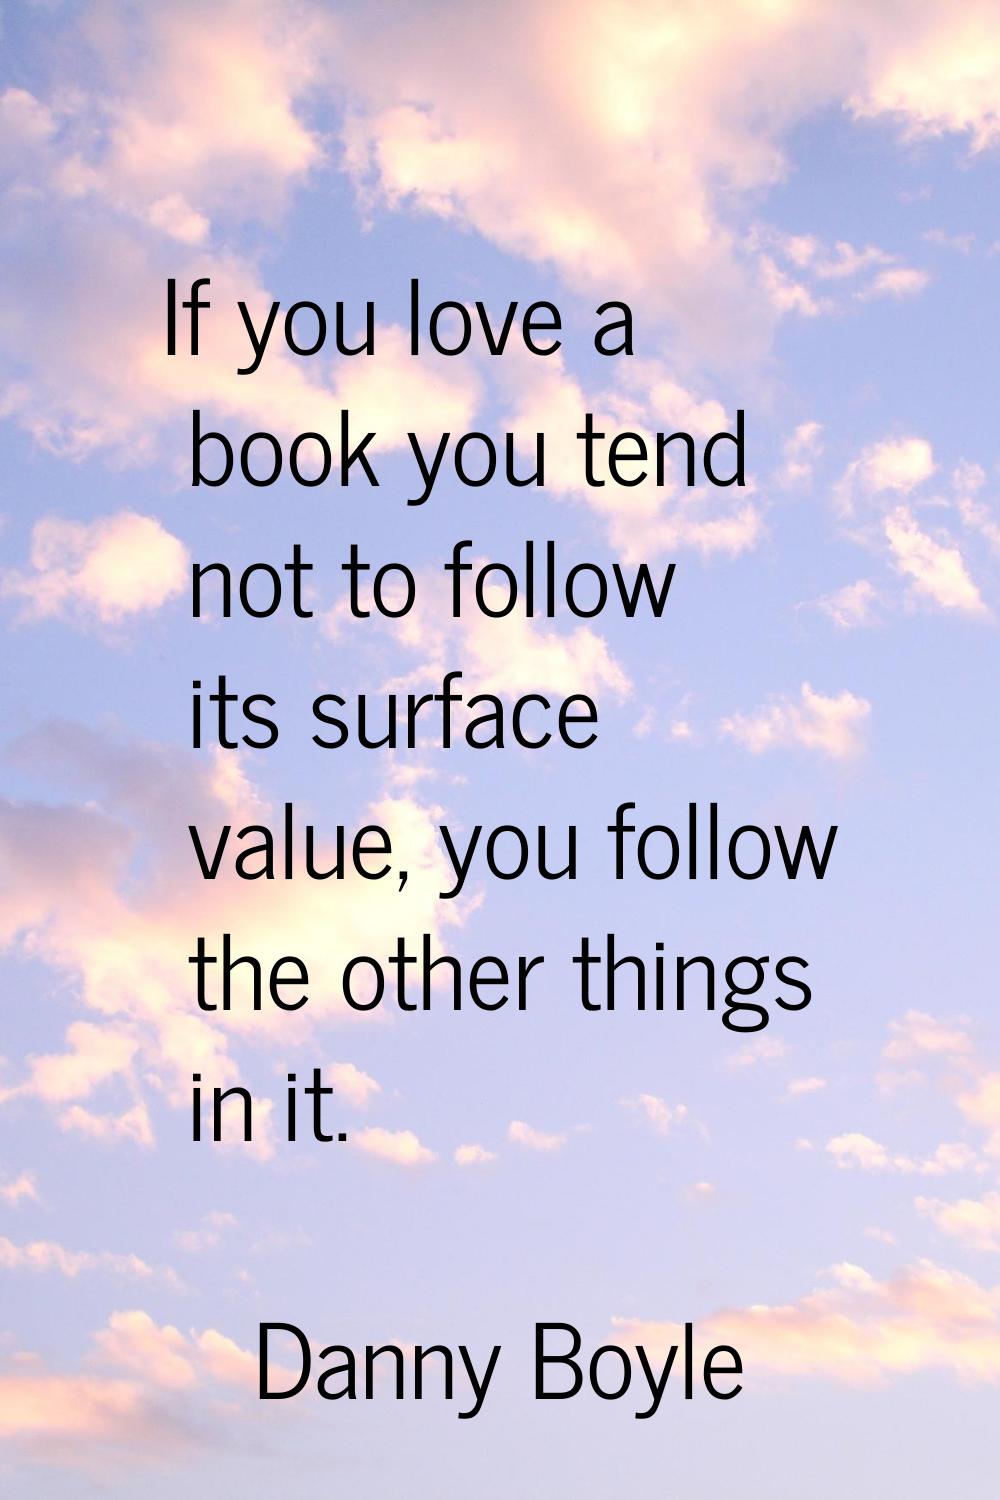 If you love a book you tend not to follow its surface value, you follow the other things in it.